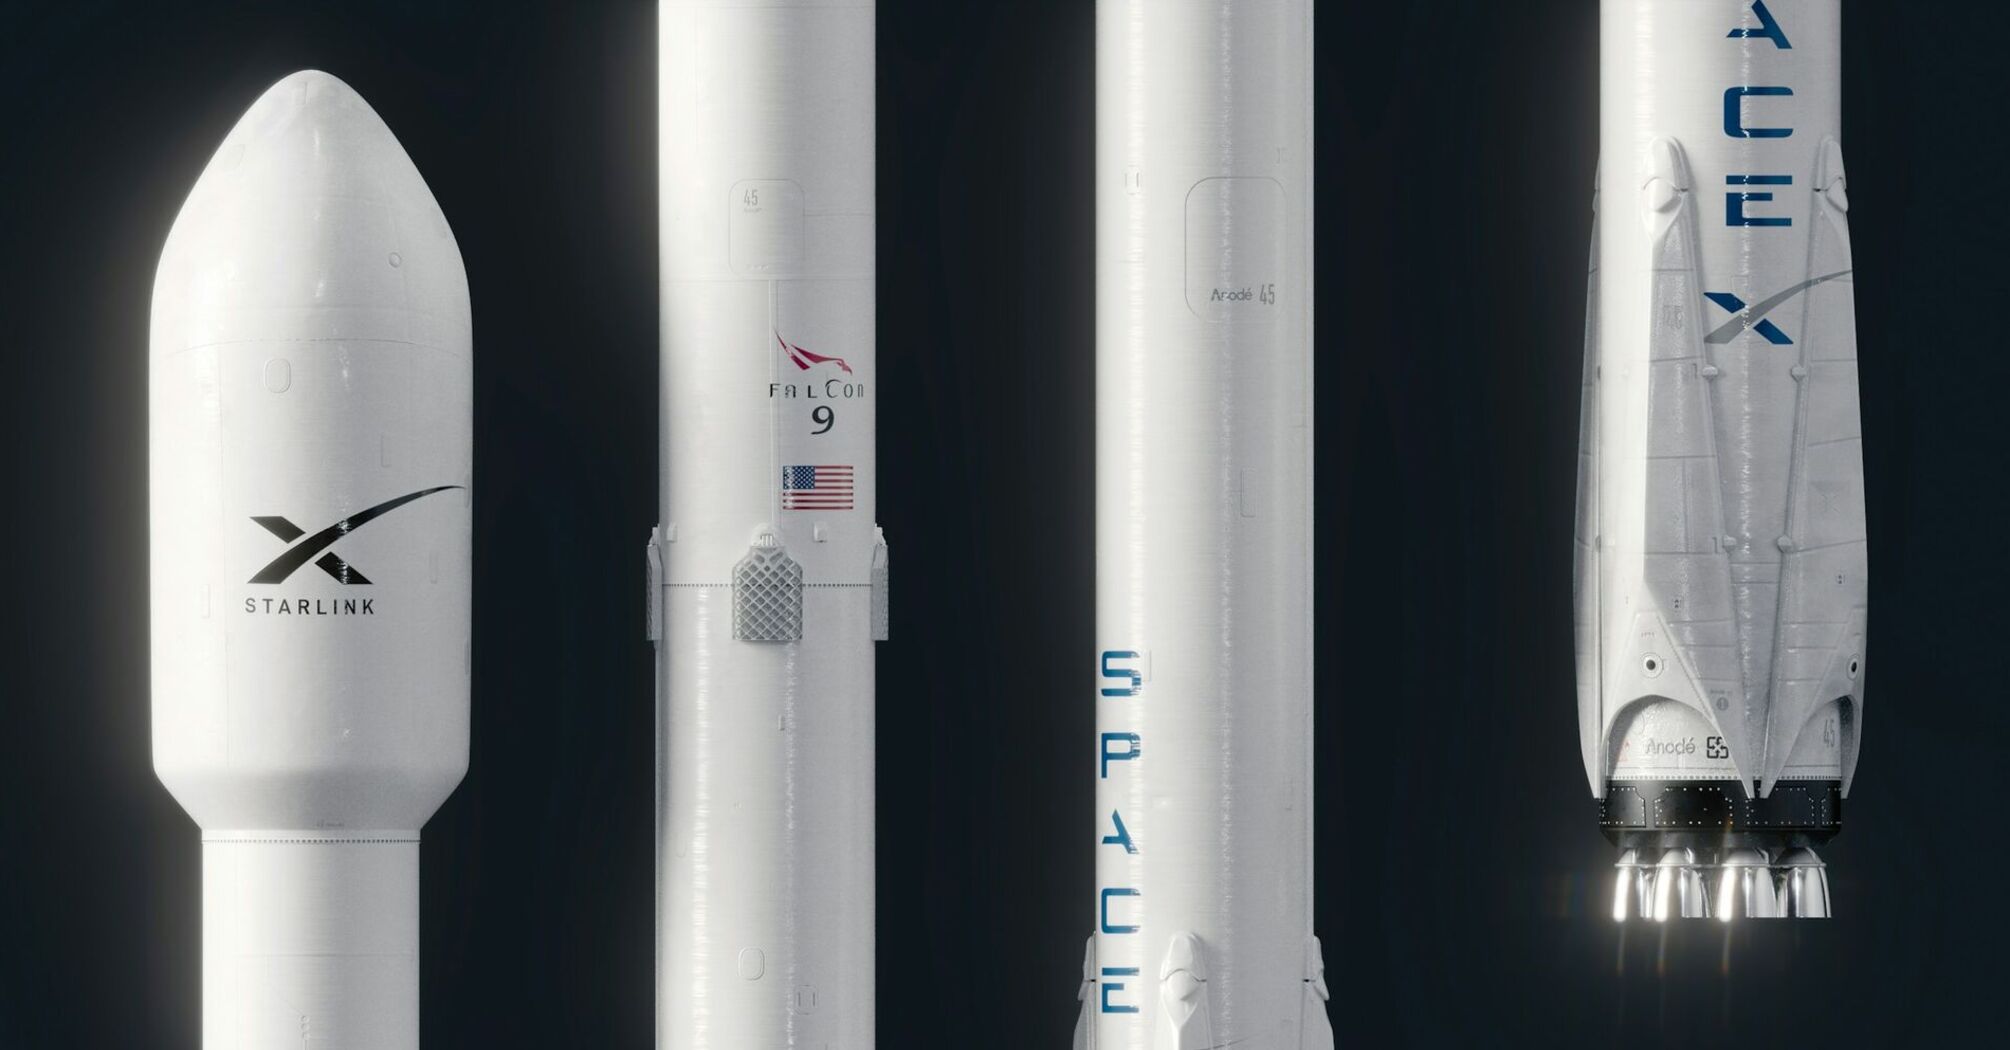 SpaceX Falcon 9 rocket with Starlink branding on the fairing